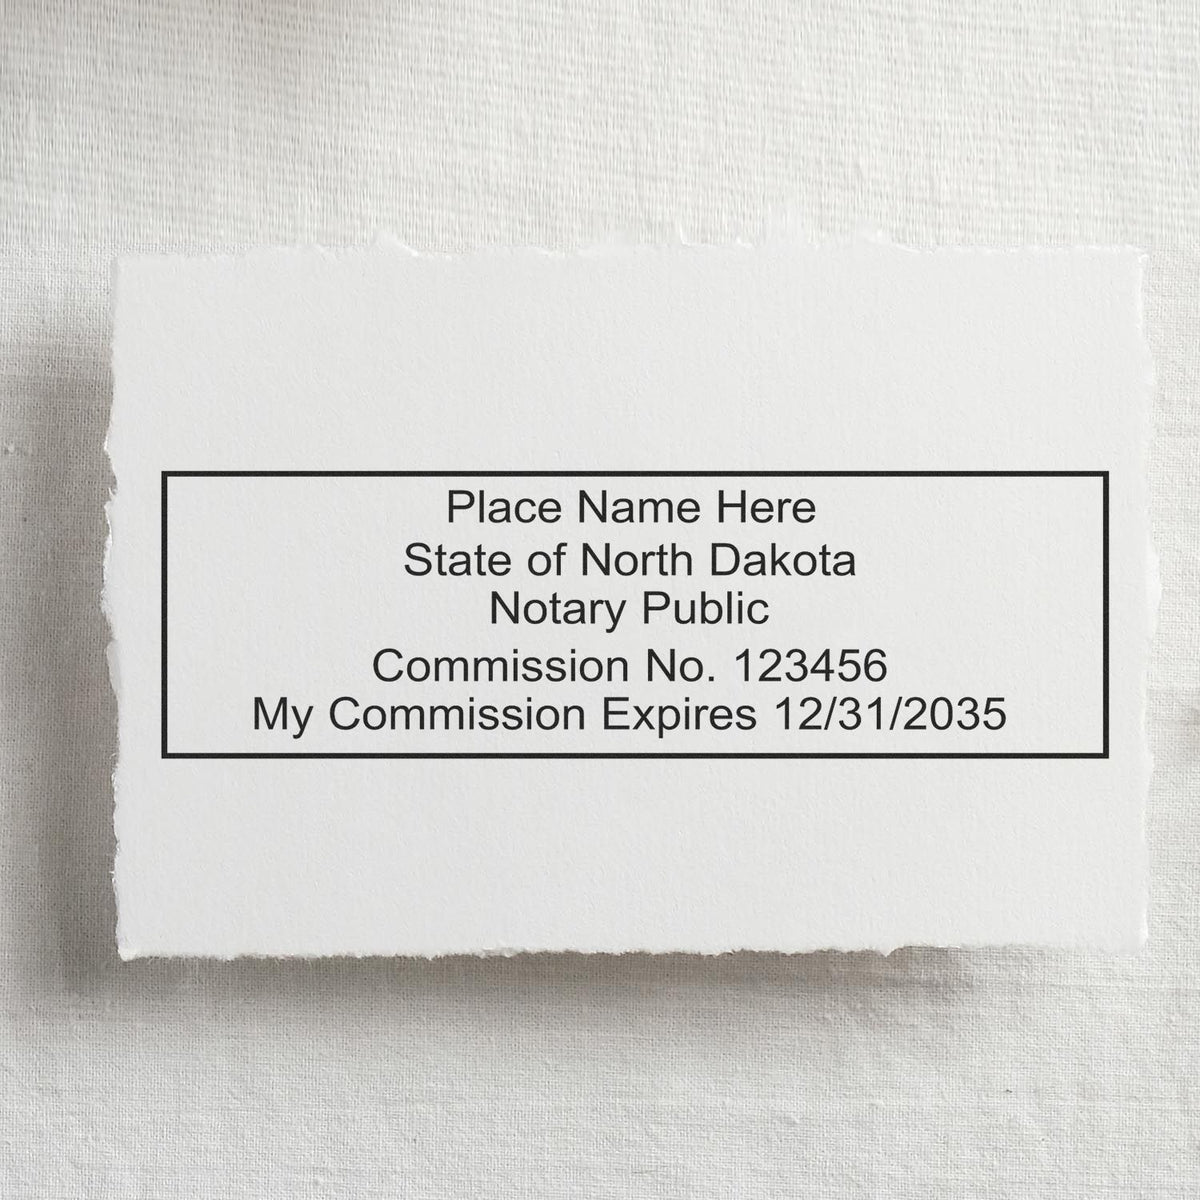 The Super Slim North Dakota Notary Public Stamp stamp impression comes to life with a crisp, detailed photo on paper - showcasing true professional quality.